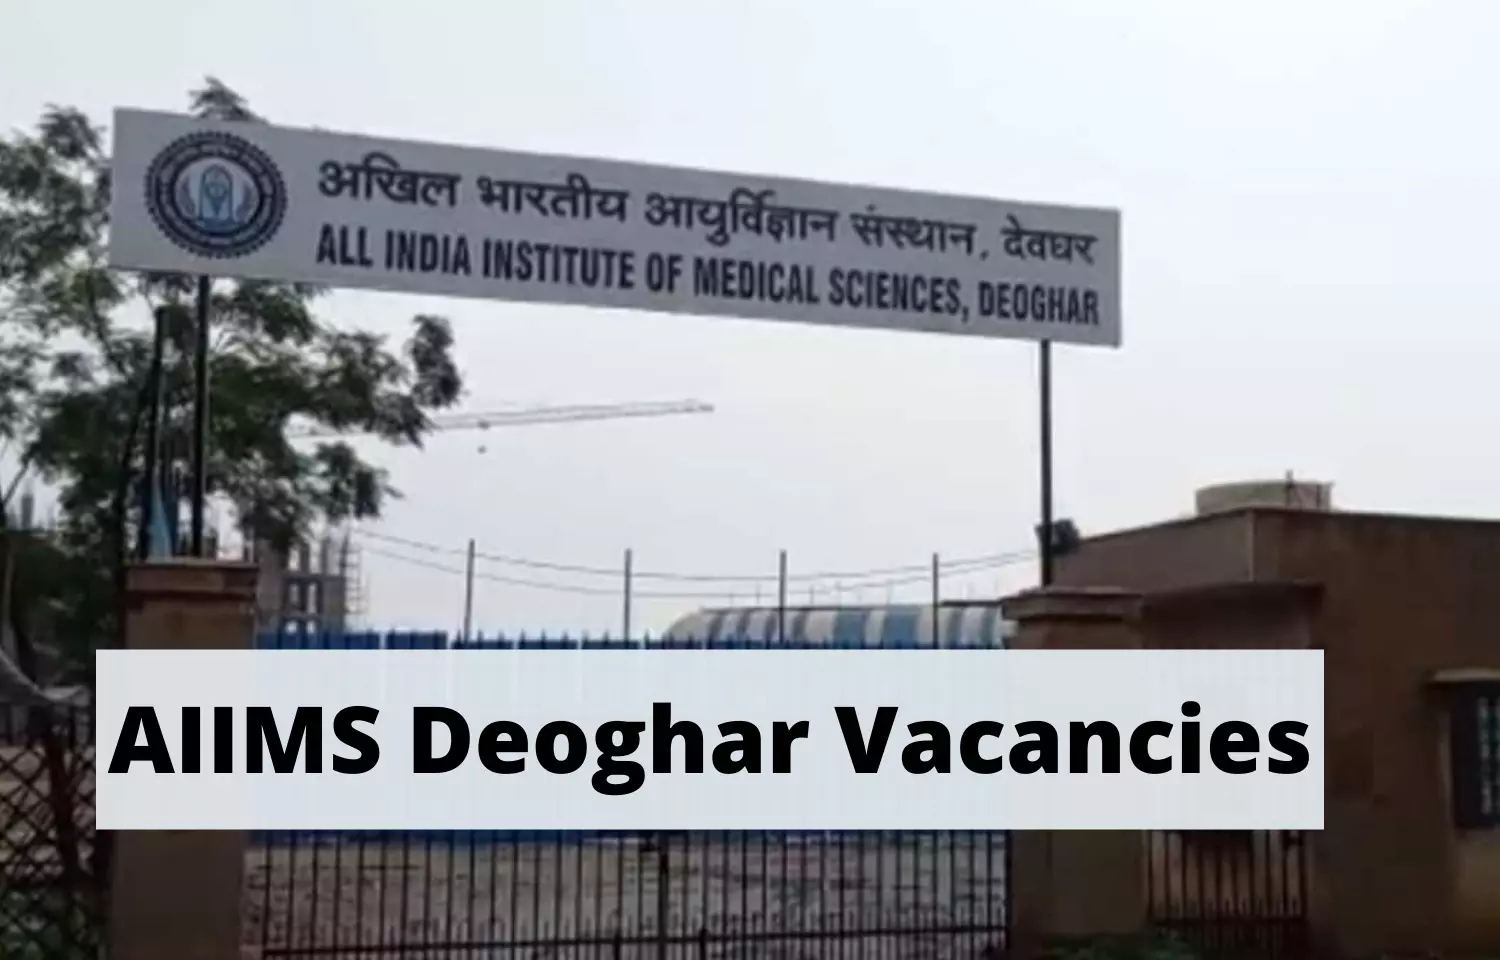 Vacancies For Senior Resident Post At AIIMS Deoghar: Check out all details here